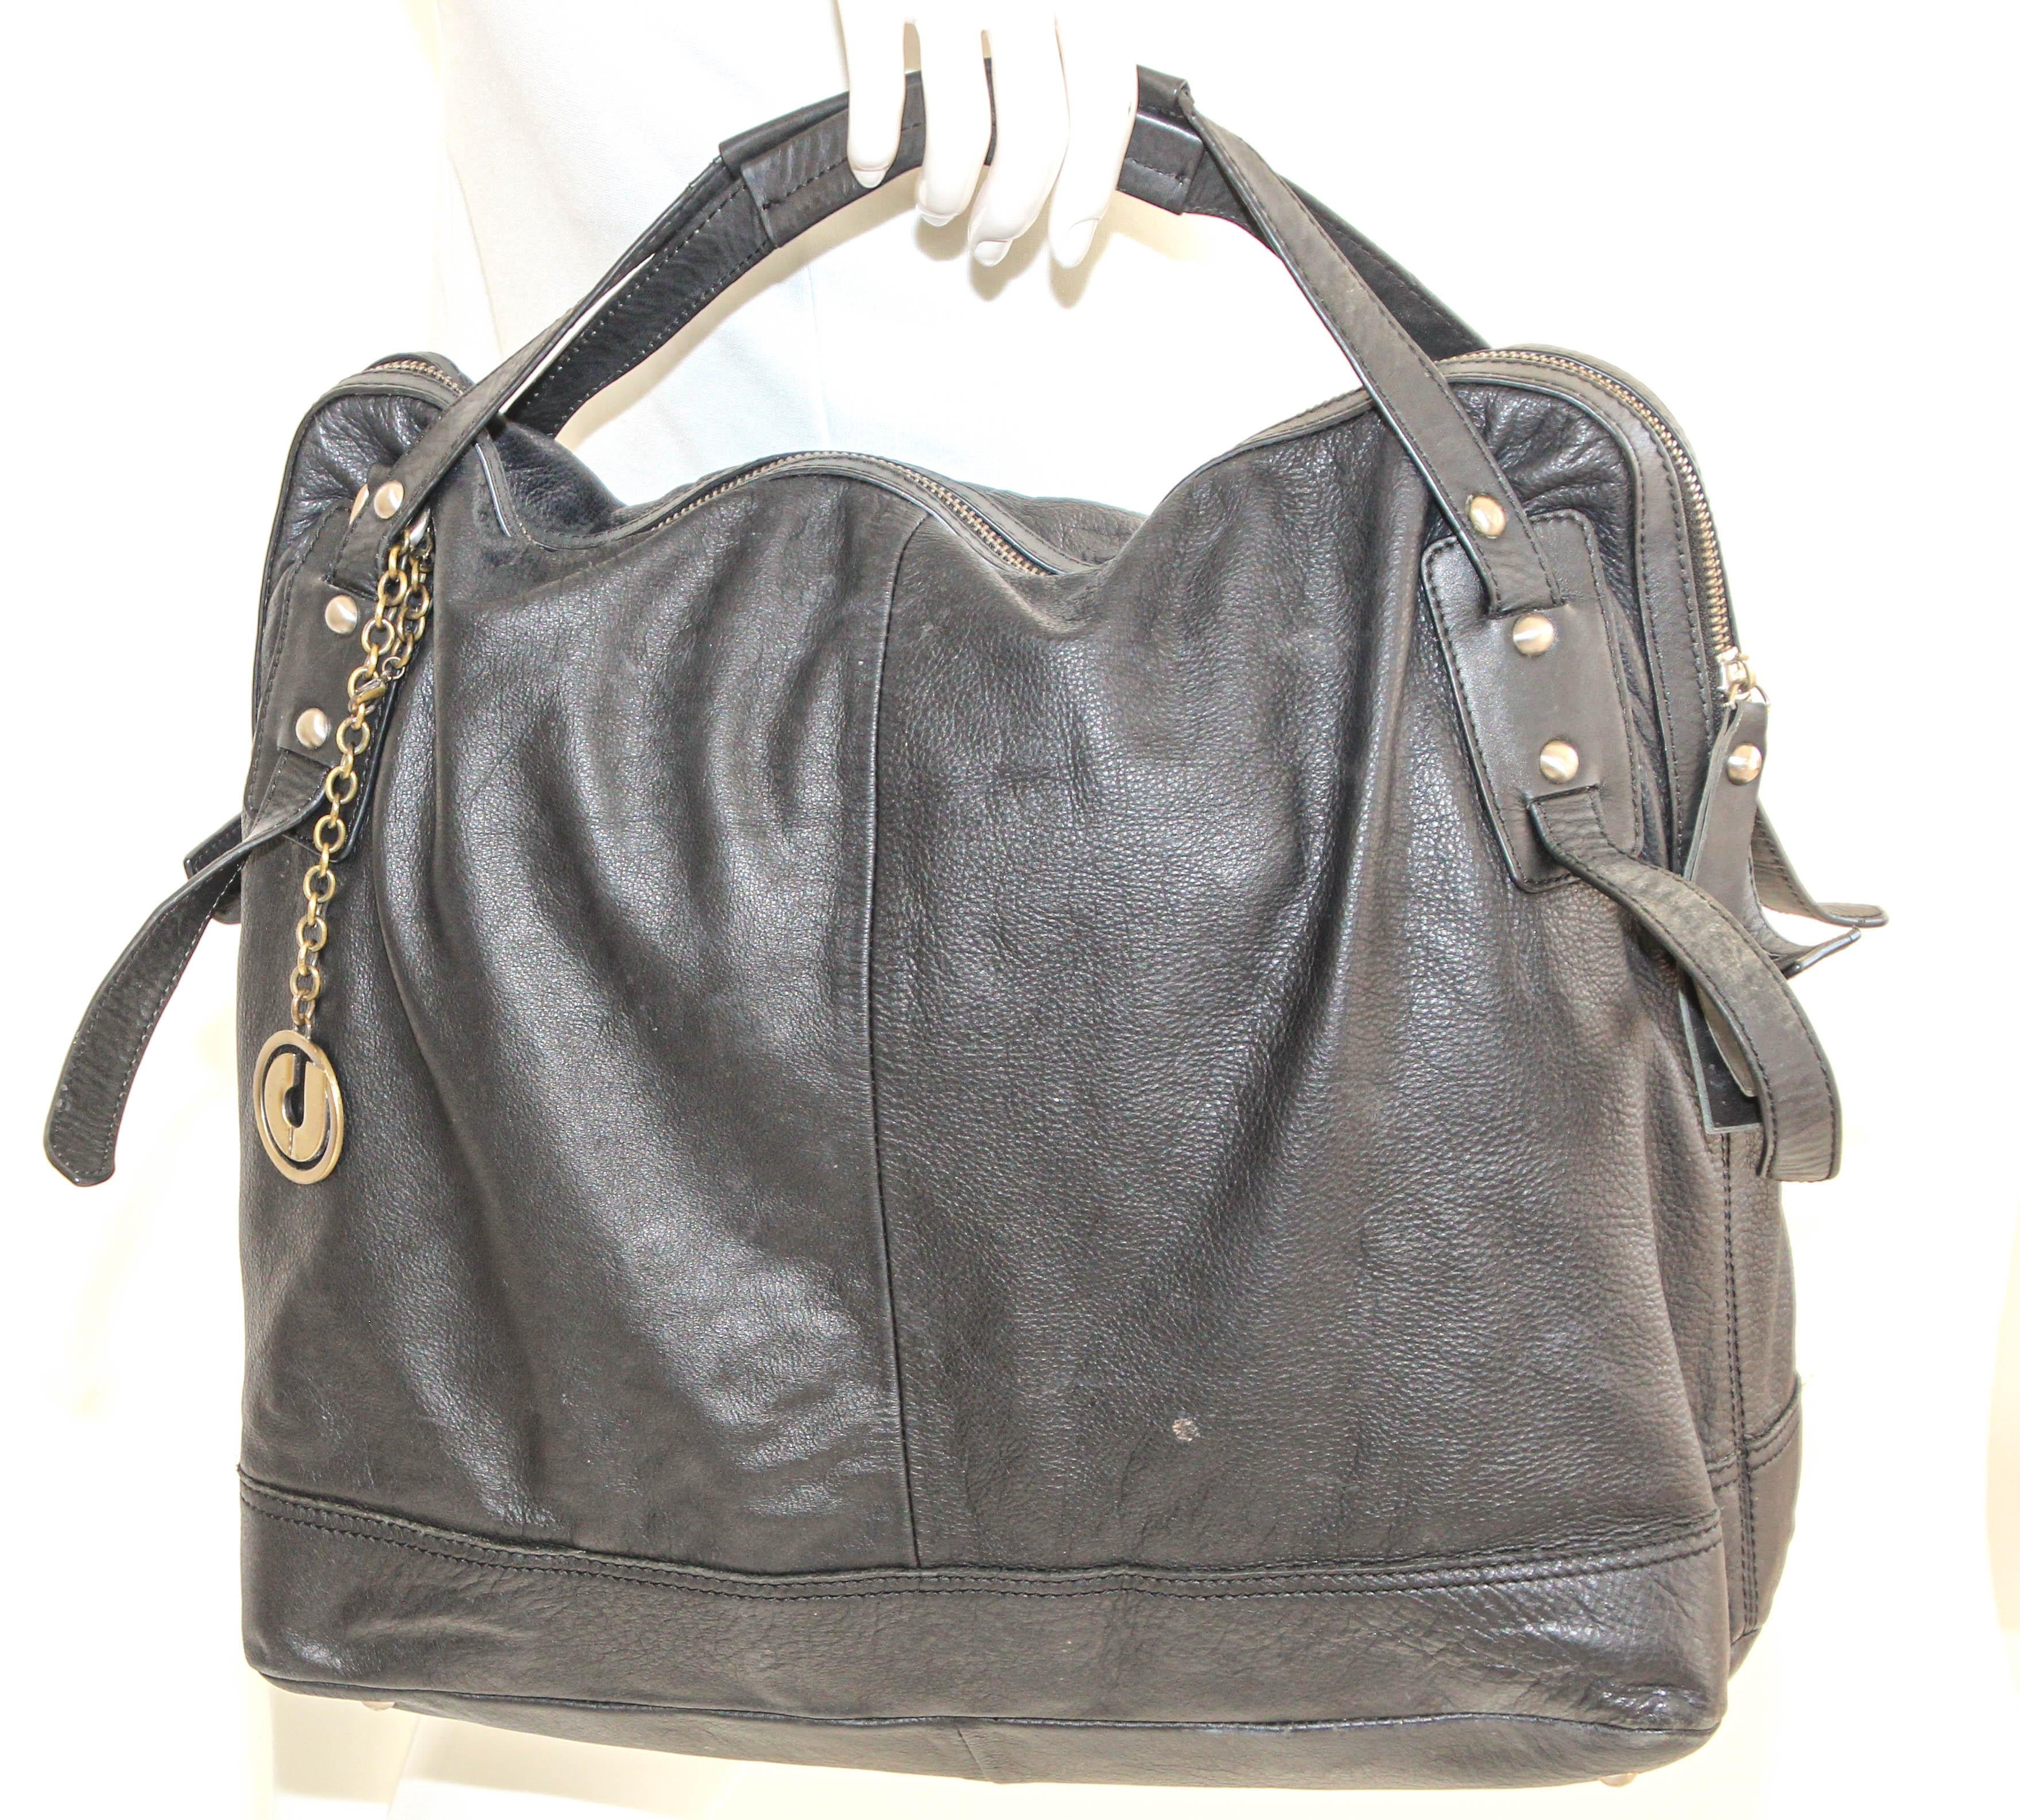 Charles Jourdan Black Leather Zip Satchel Bag.
Calfskin black Hobo Classic Large Handle Computer Bag.
Vintage Charles Jourdan tote bag in soft leather with top zipper and two leather handles.
It is in good pre-owned good condition, some light